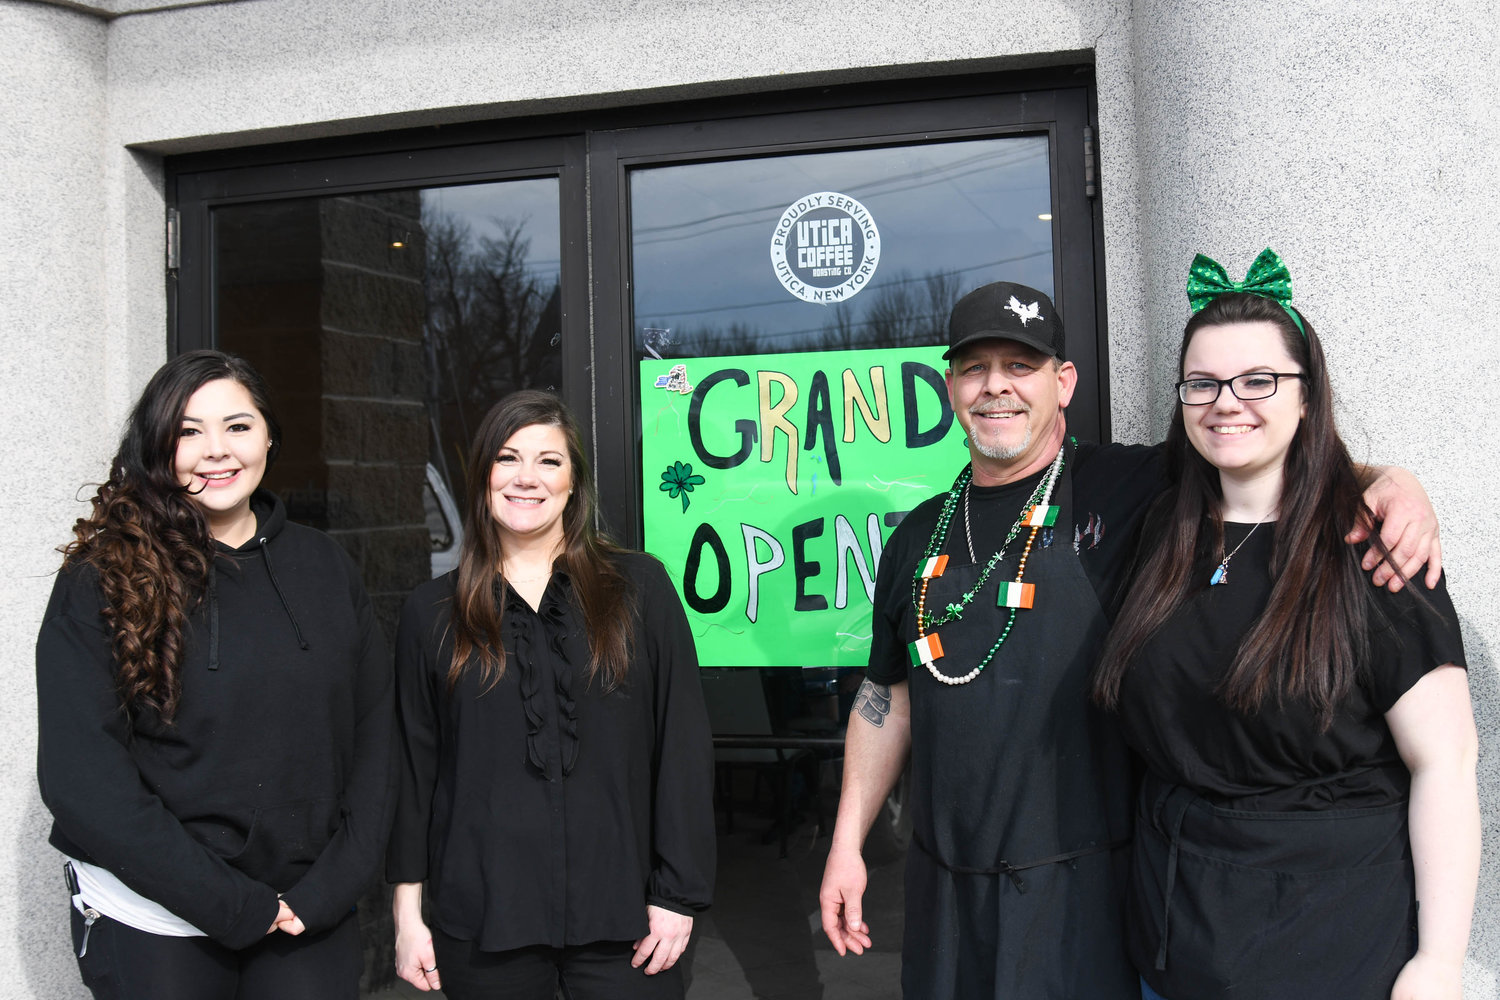 GRAND OPENING — Midway Diner, 7295 W. Main St. in Westmoreland, celebrated its official grand opening on Thursday.  For diner’s hours and menu, check out their Facebook page.